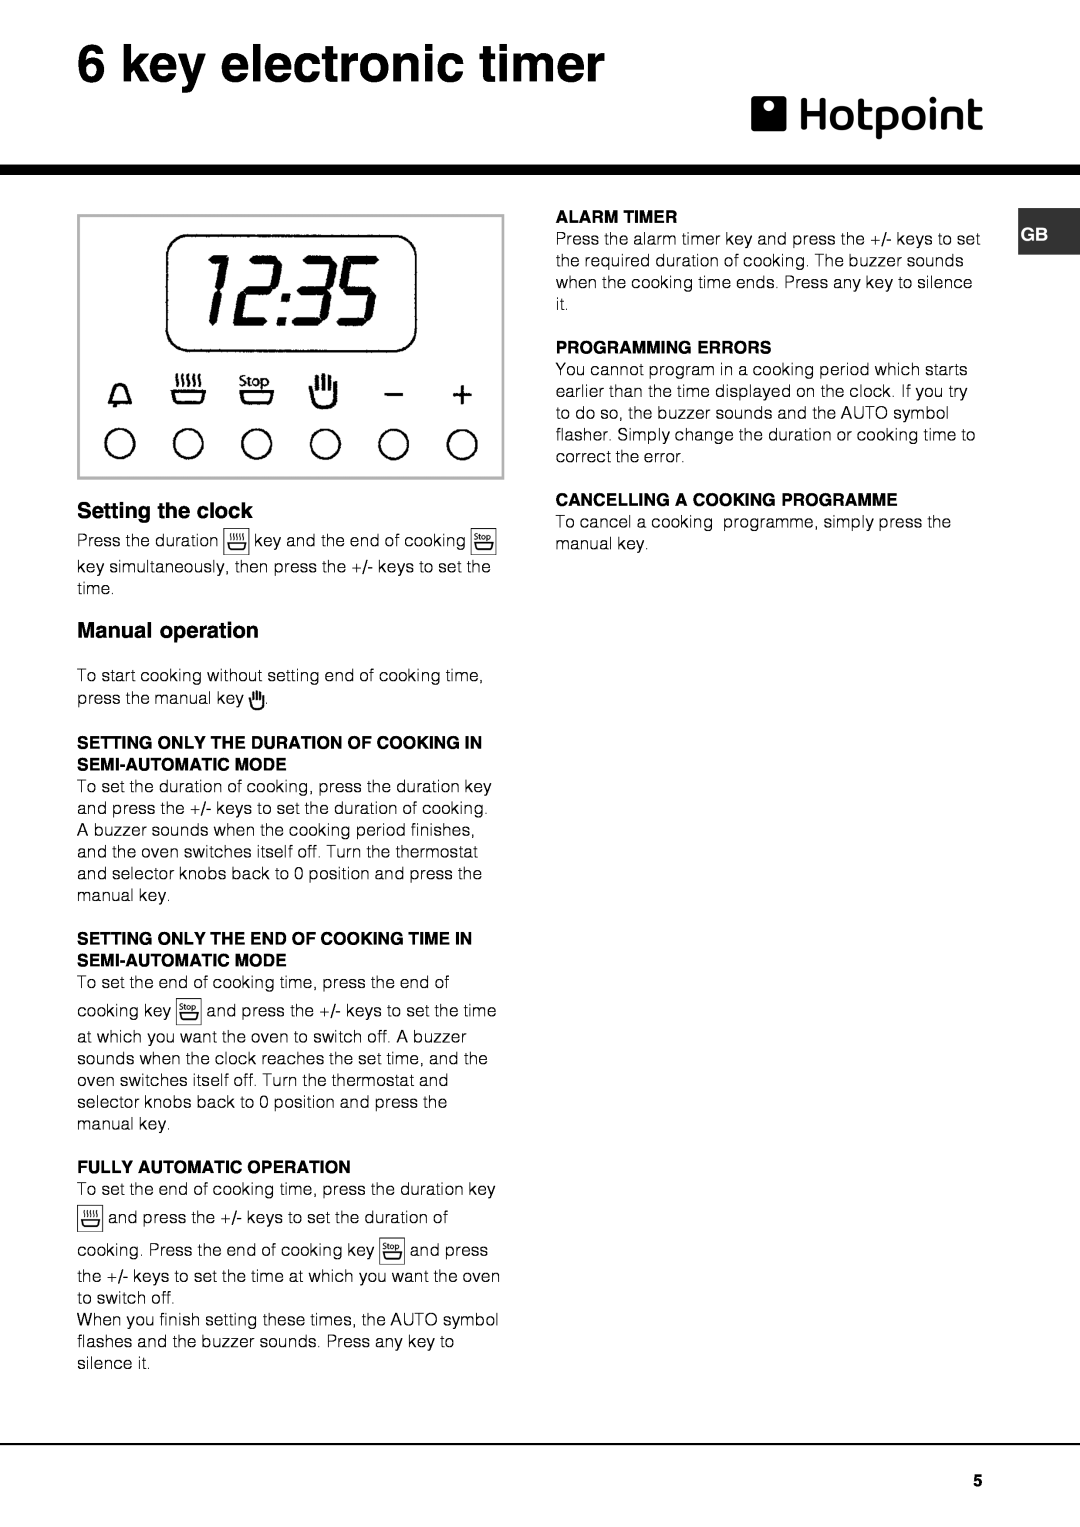 Hotpoint SHL532X manual key electronic timer, Setting the clock, Manual operation, Fully Automatic Operation, Alarm Timer 